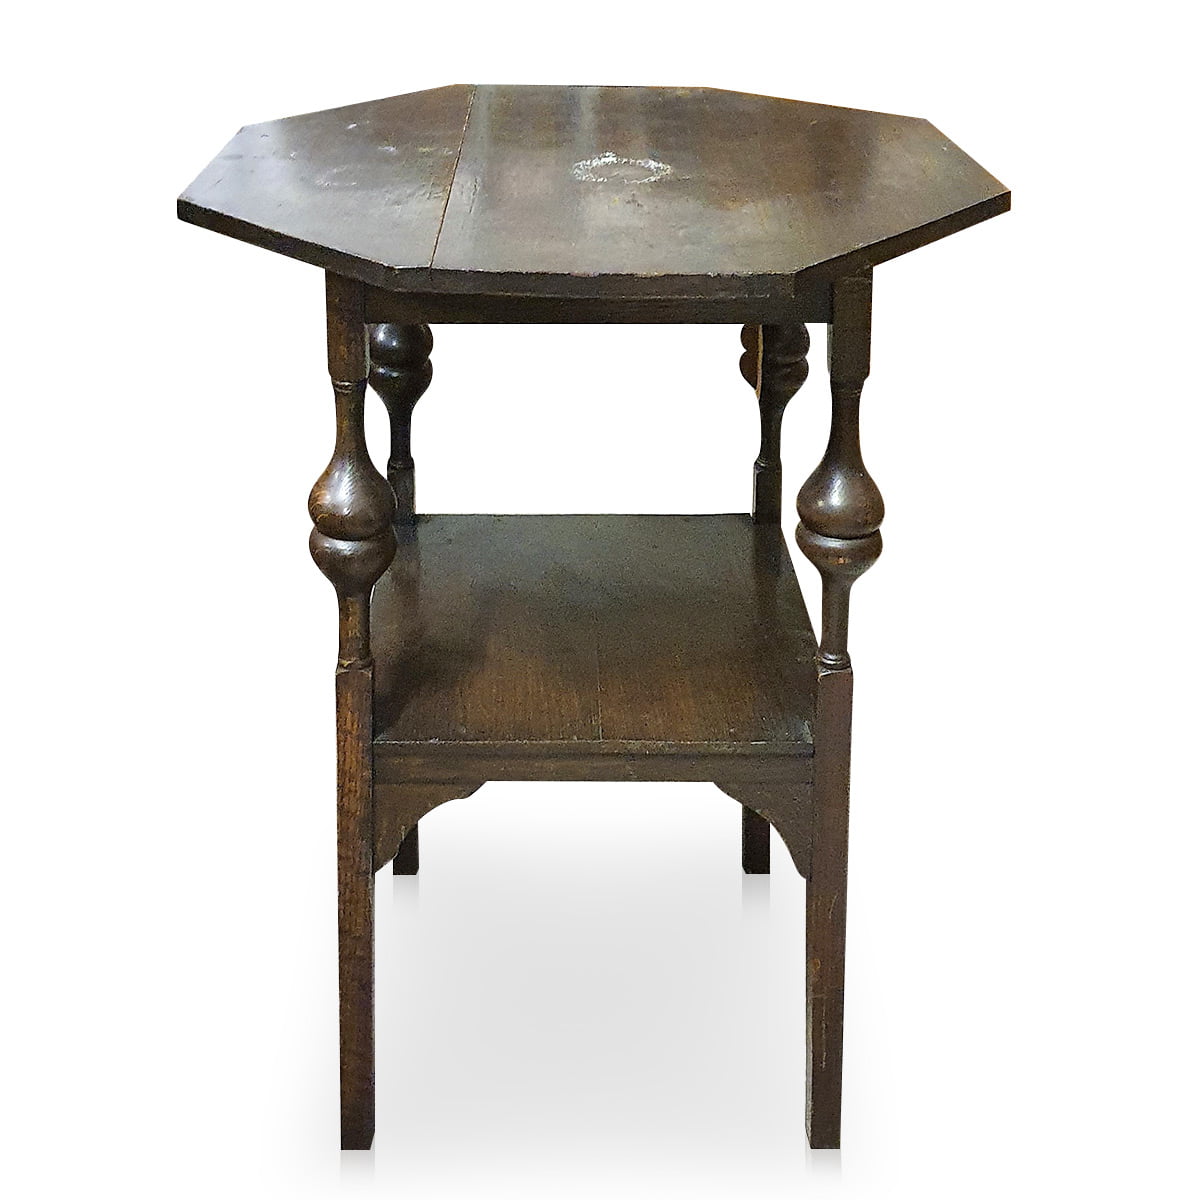 Octagonal arts and crafts movement side table with undershelf